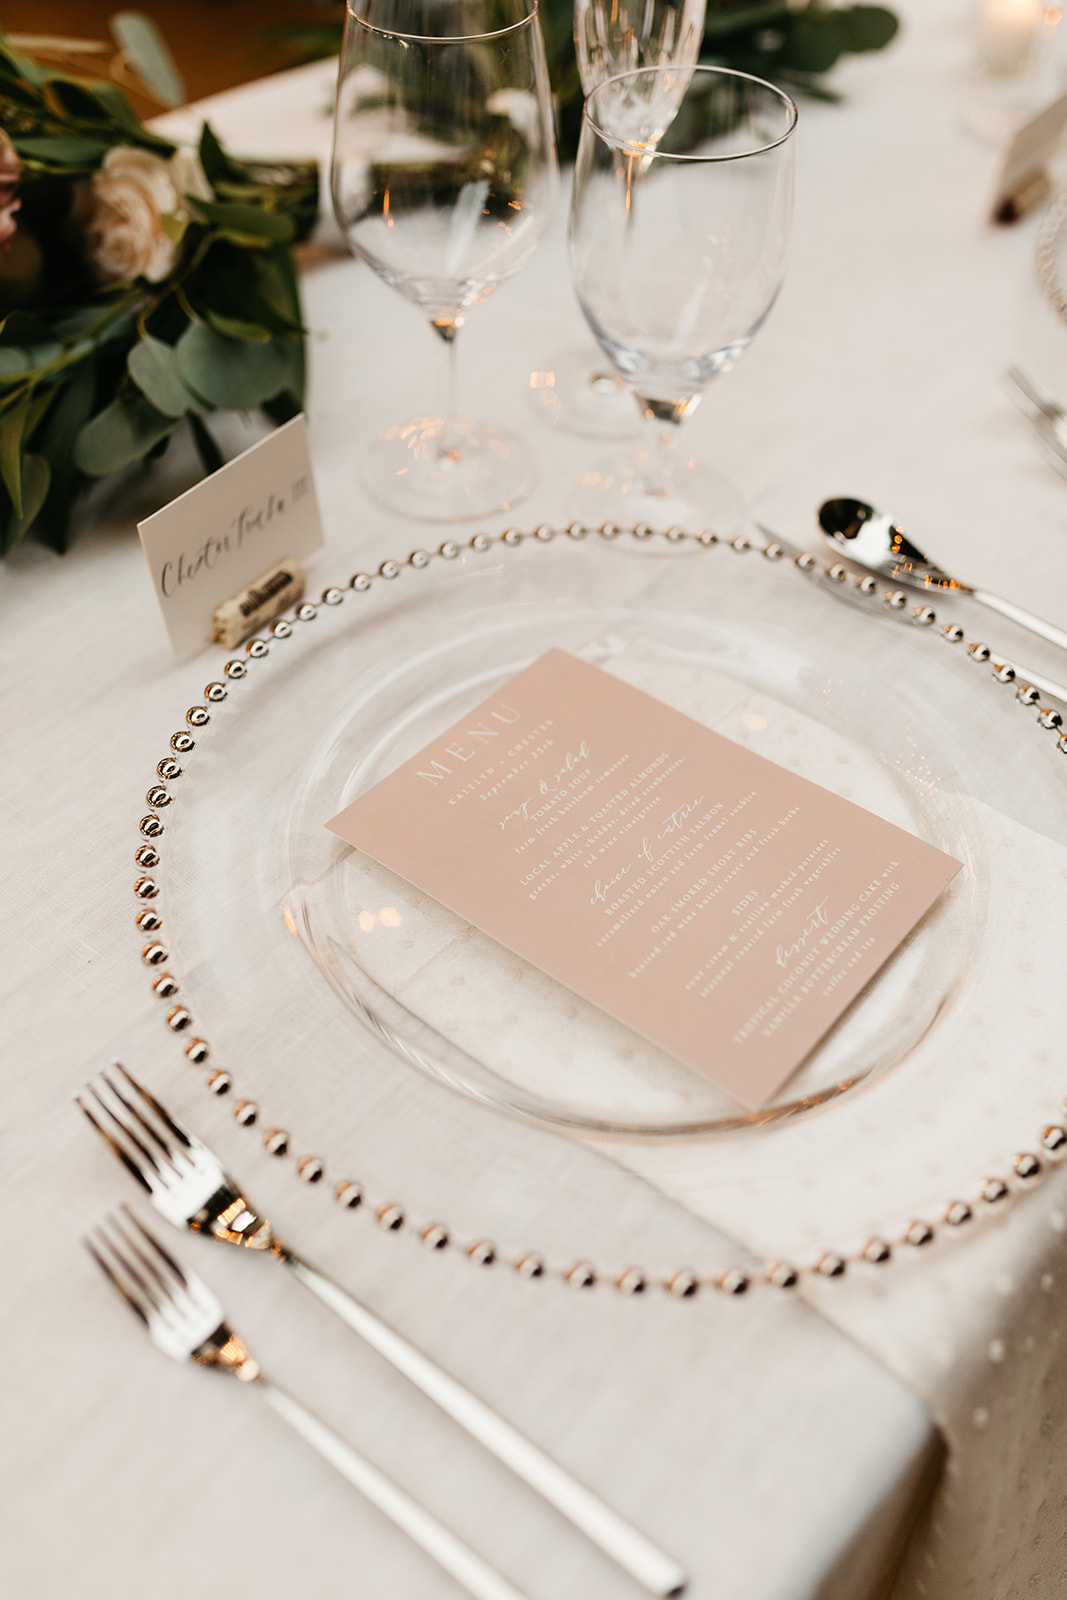 Intimate vineyard wedding reception at Roblar winery with blush pink menus and clear plates